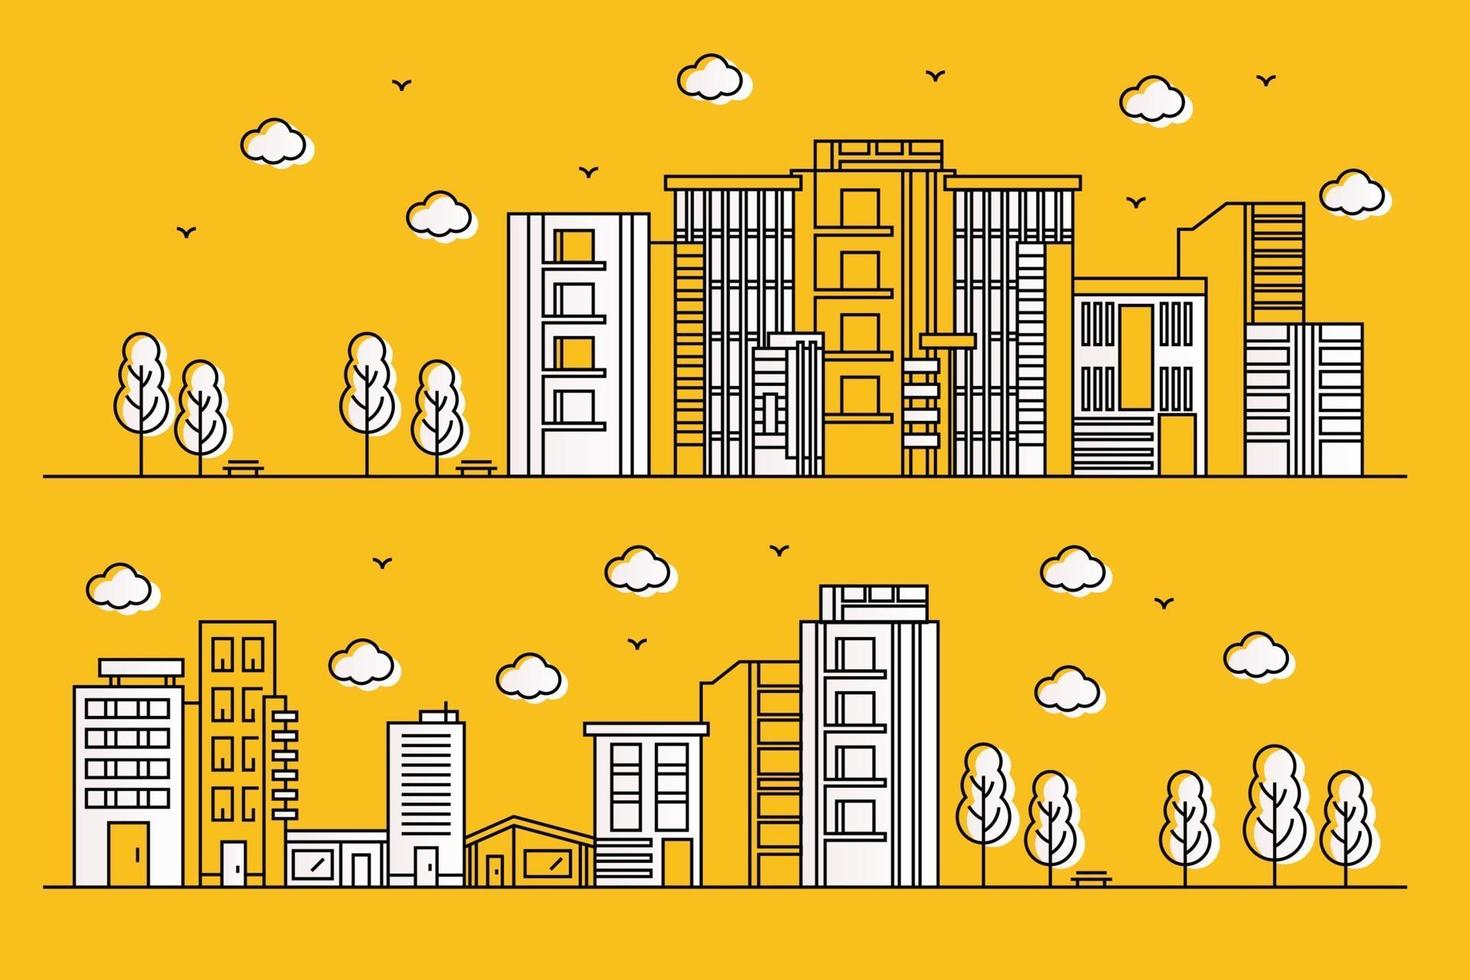 Urban illustration with various shapes of buildings in line style of paper with trees vector